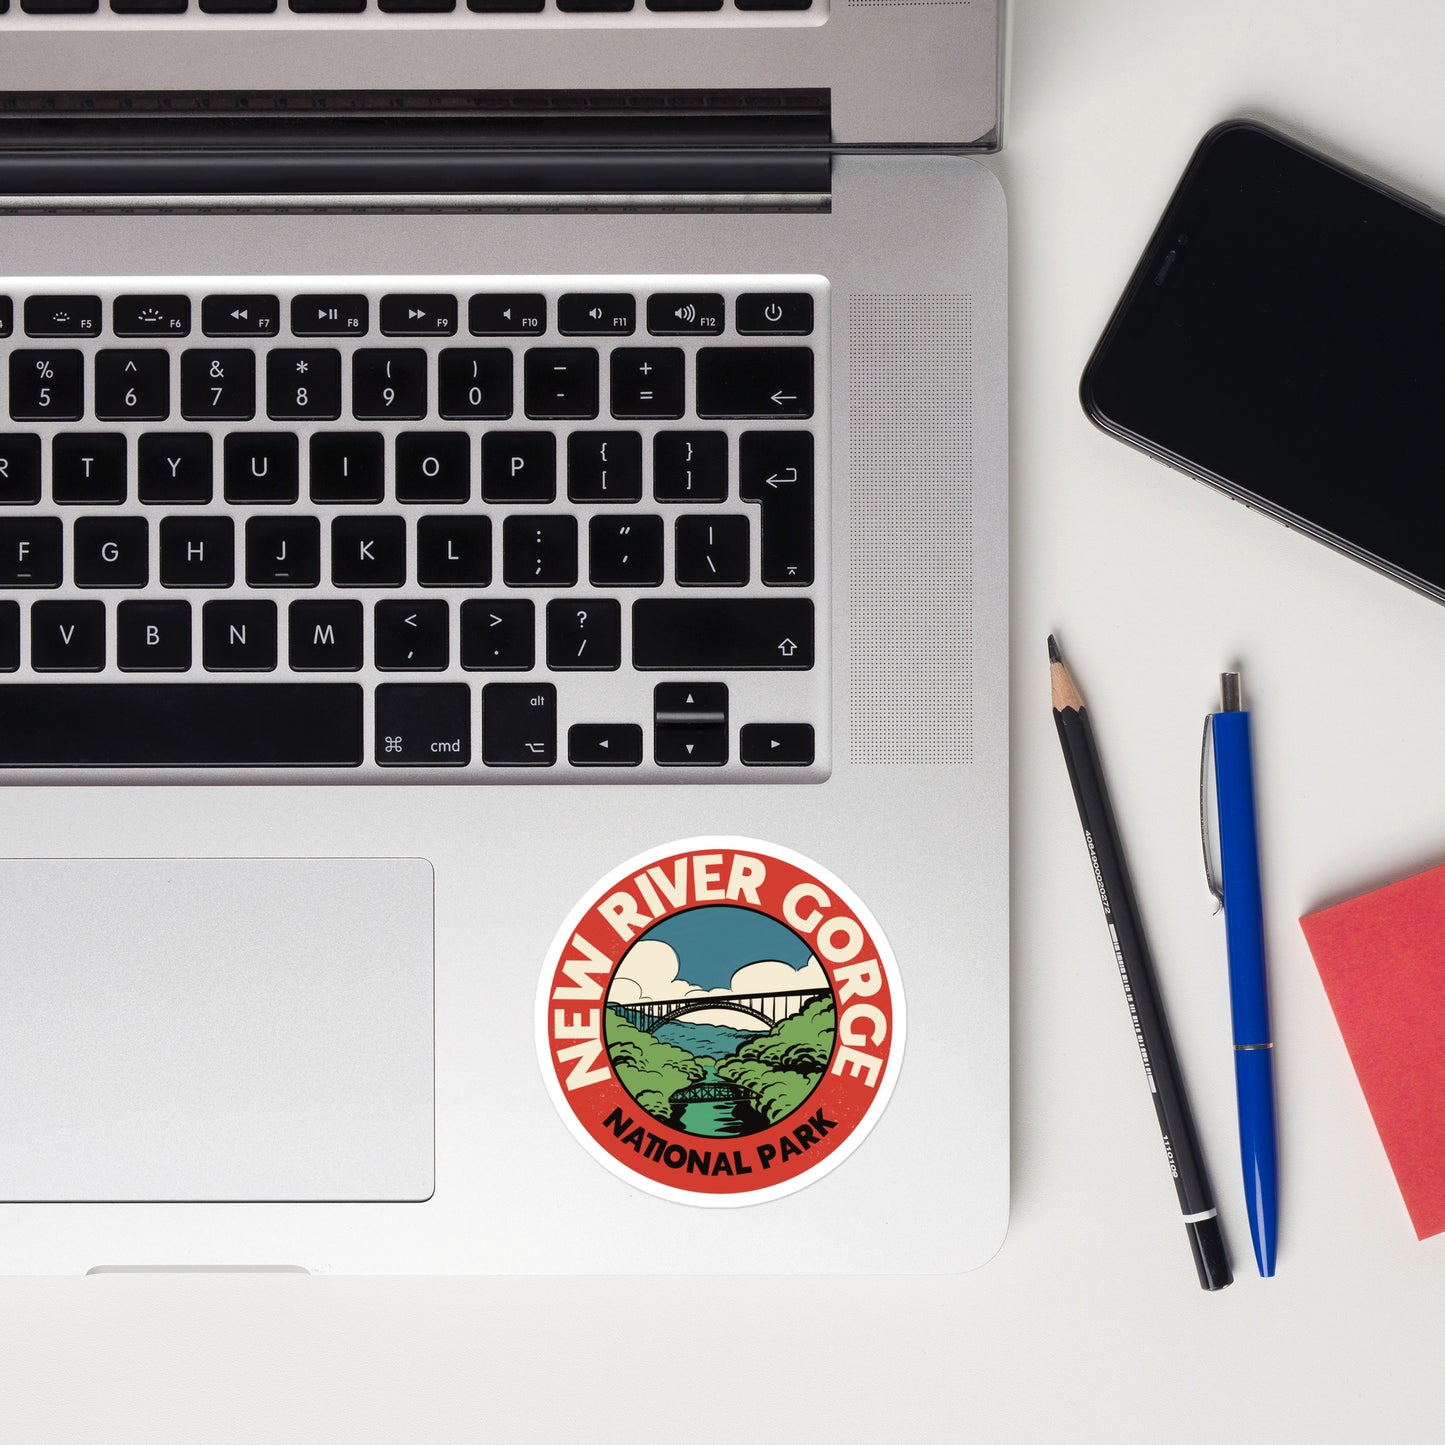 A sticker of New River Gorge National Park on a laptop